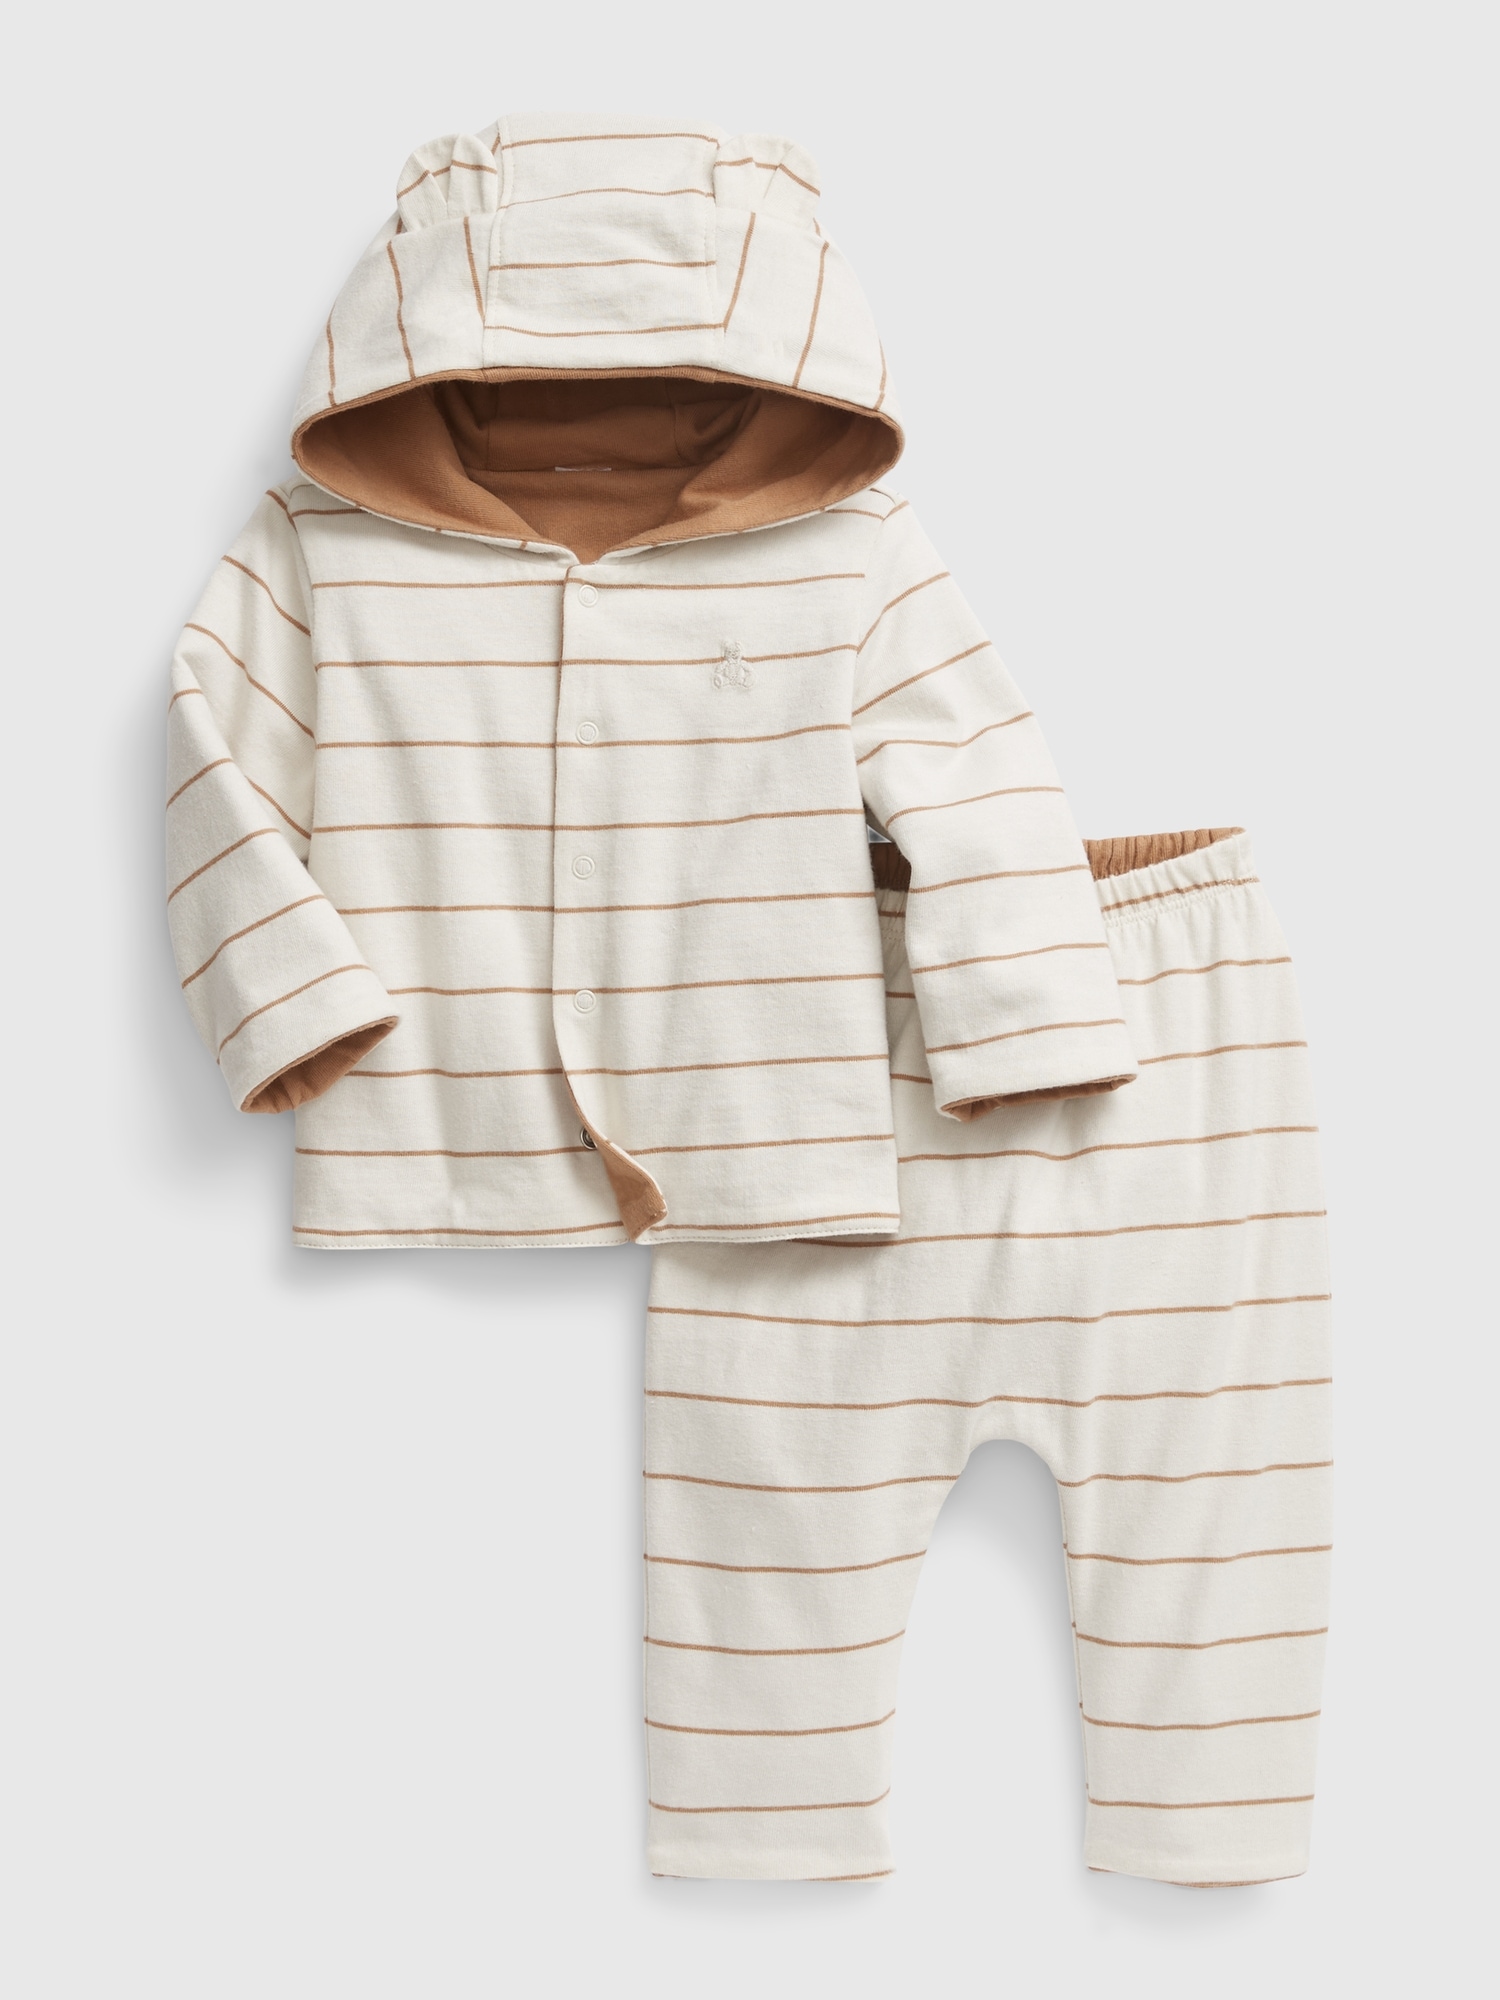 Gap Baby 100% Organic Cotton Reversible Two-Piece Outfit Set beige. 1